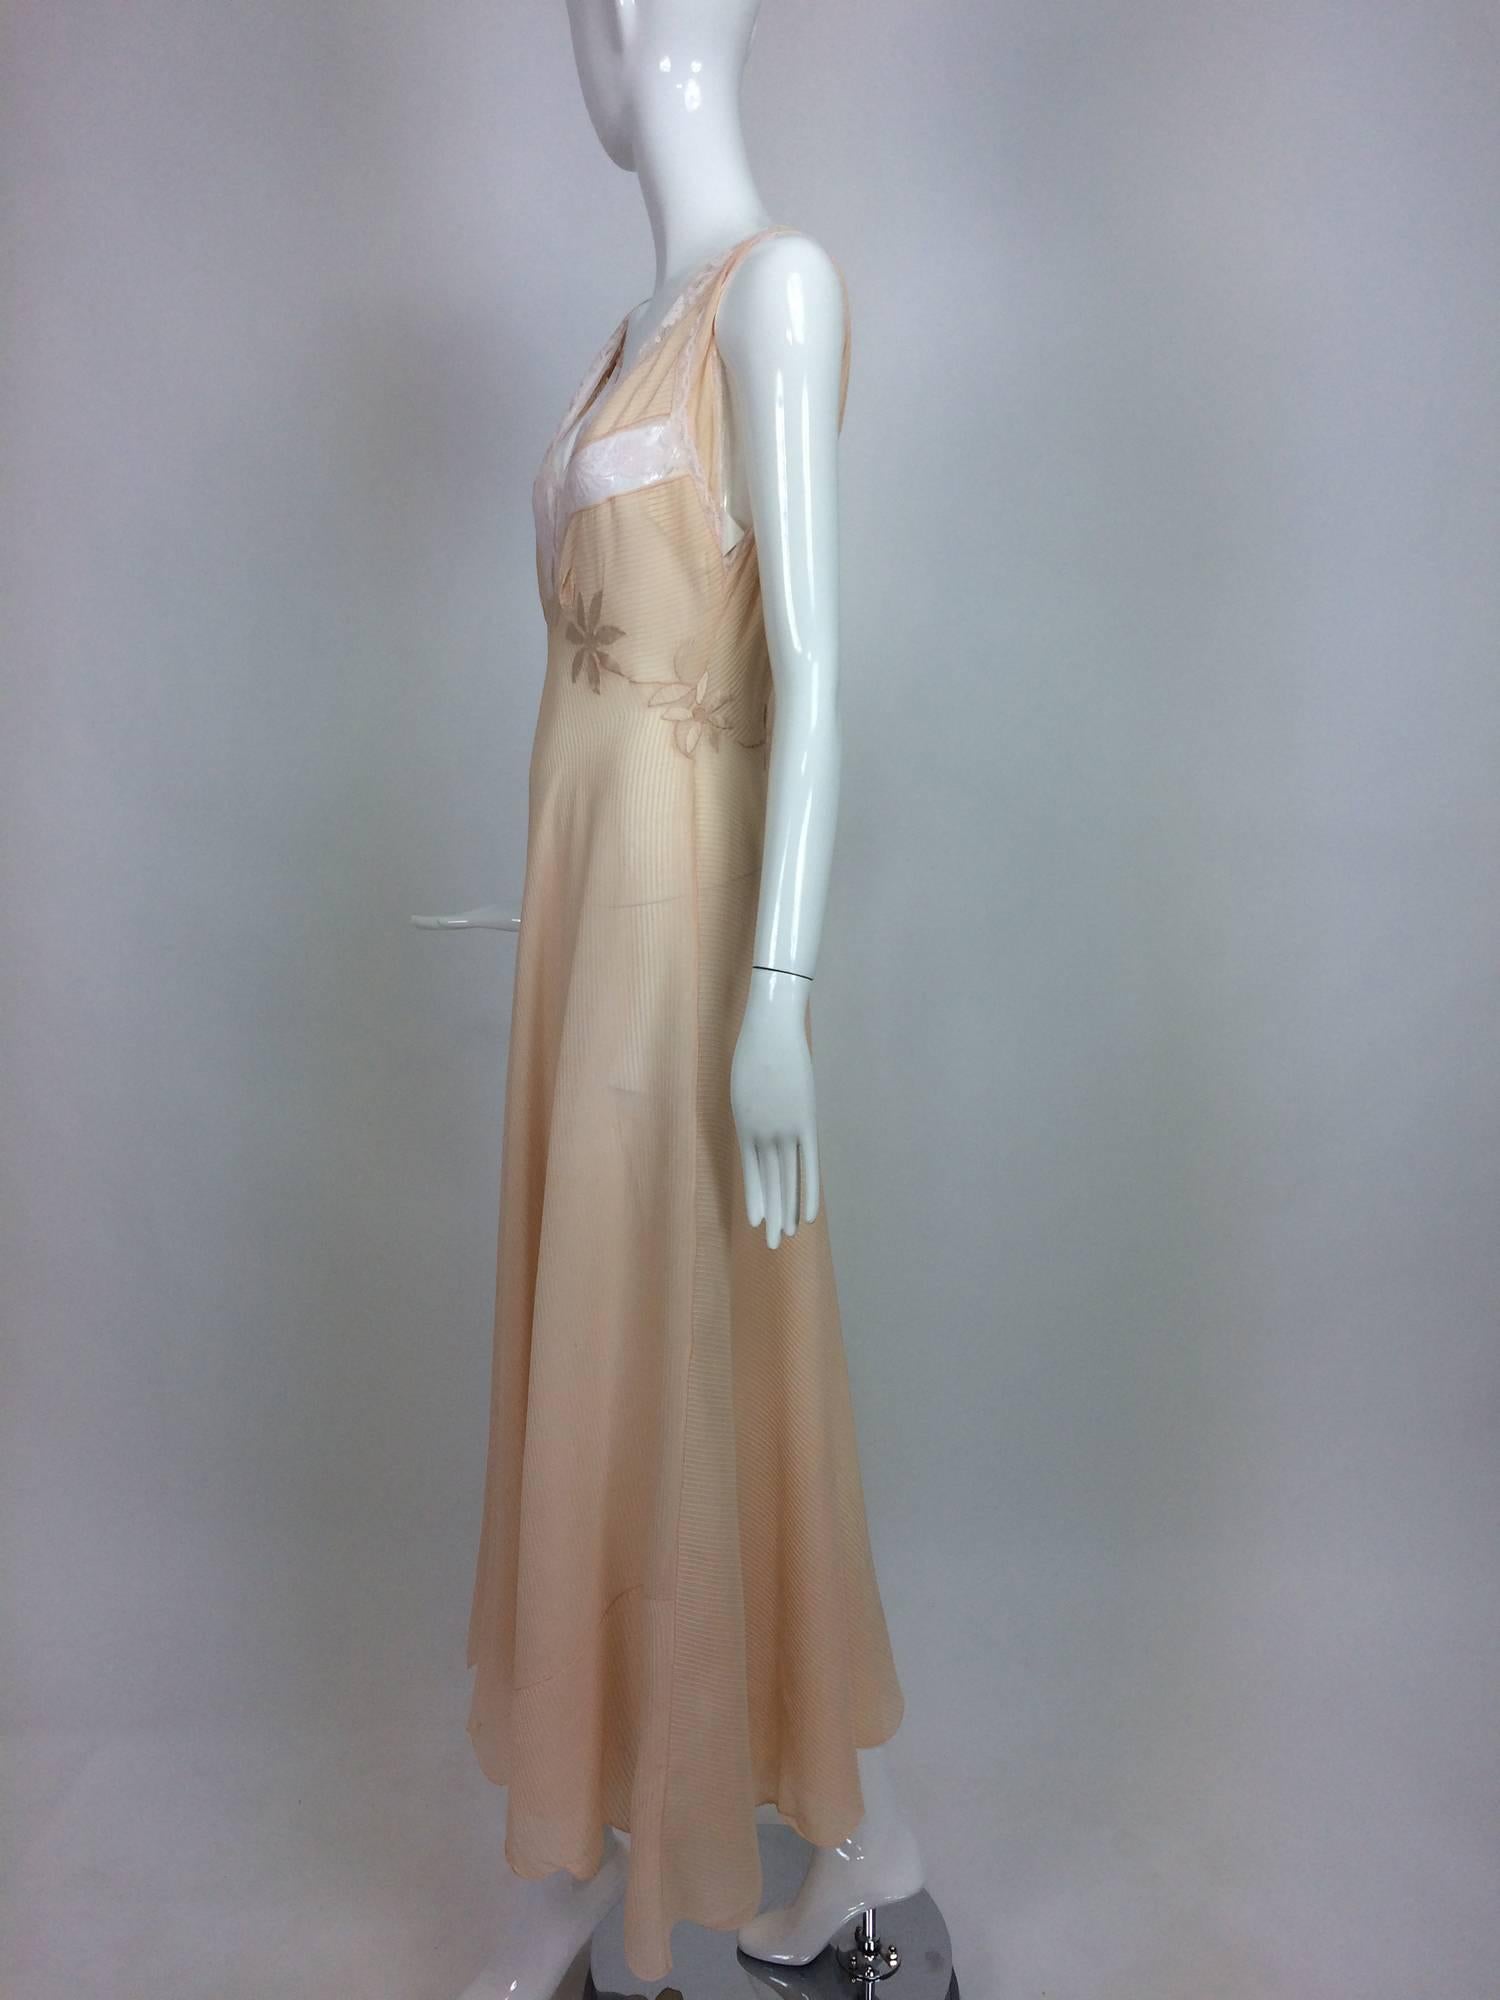 Vintage hand made pleated silk chiffon bias cut appliqued night gown 1930s 1